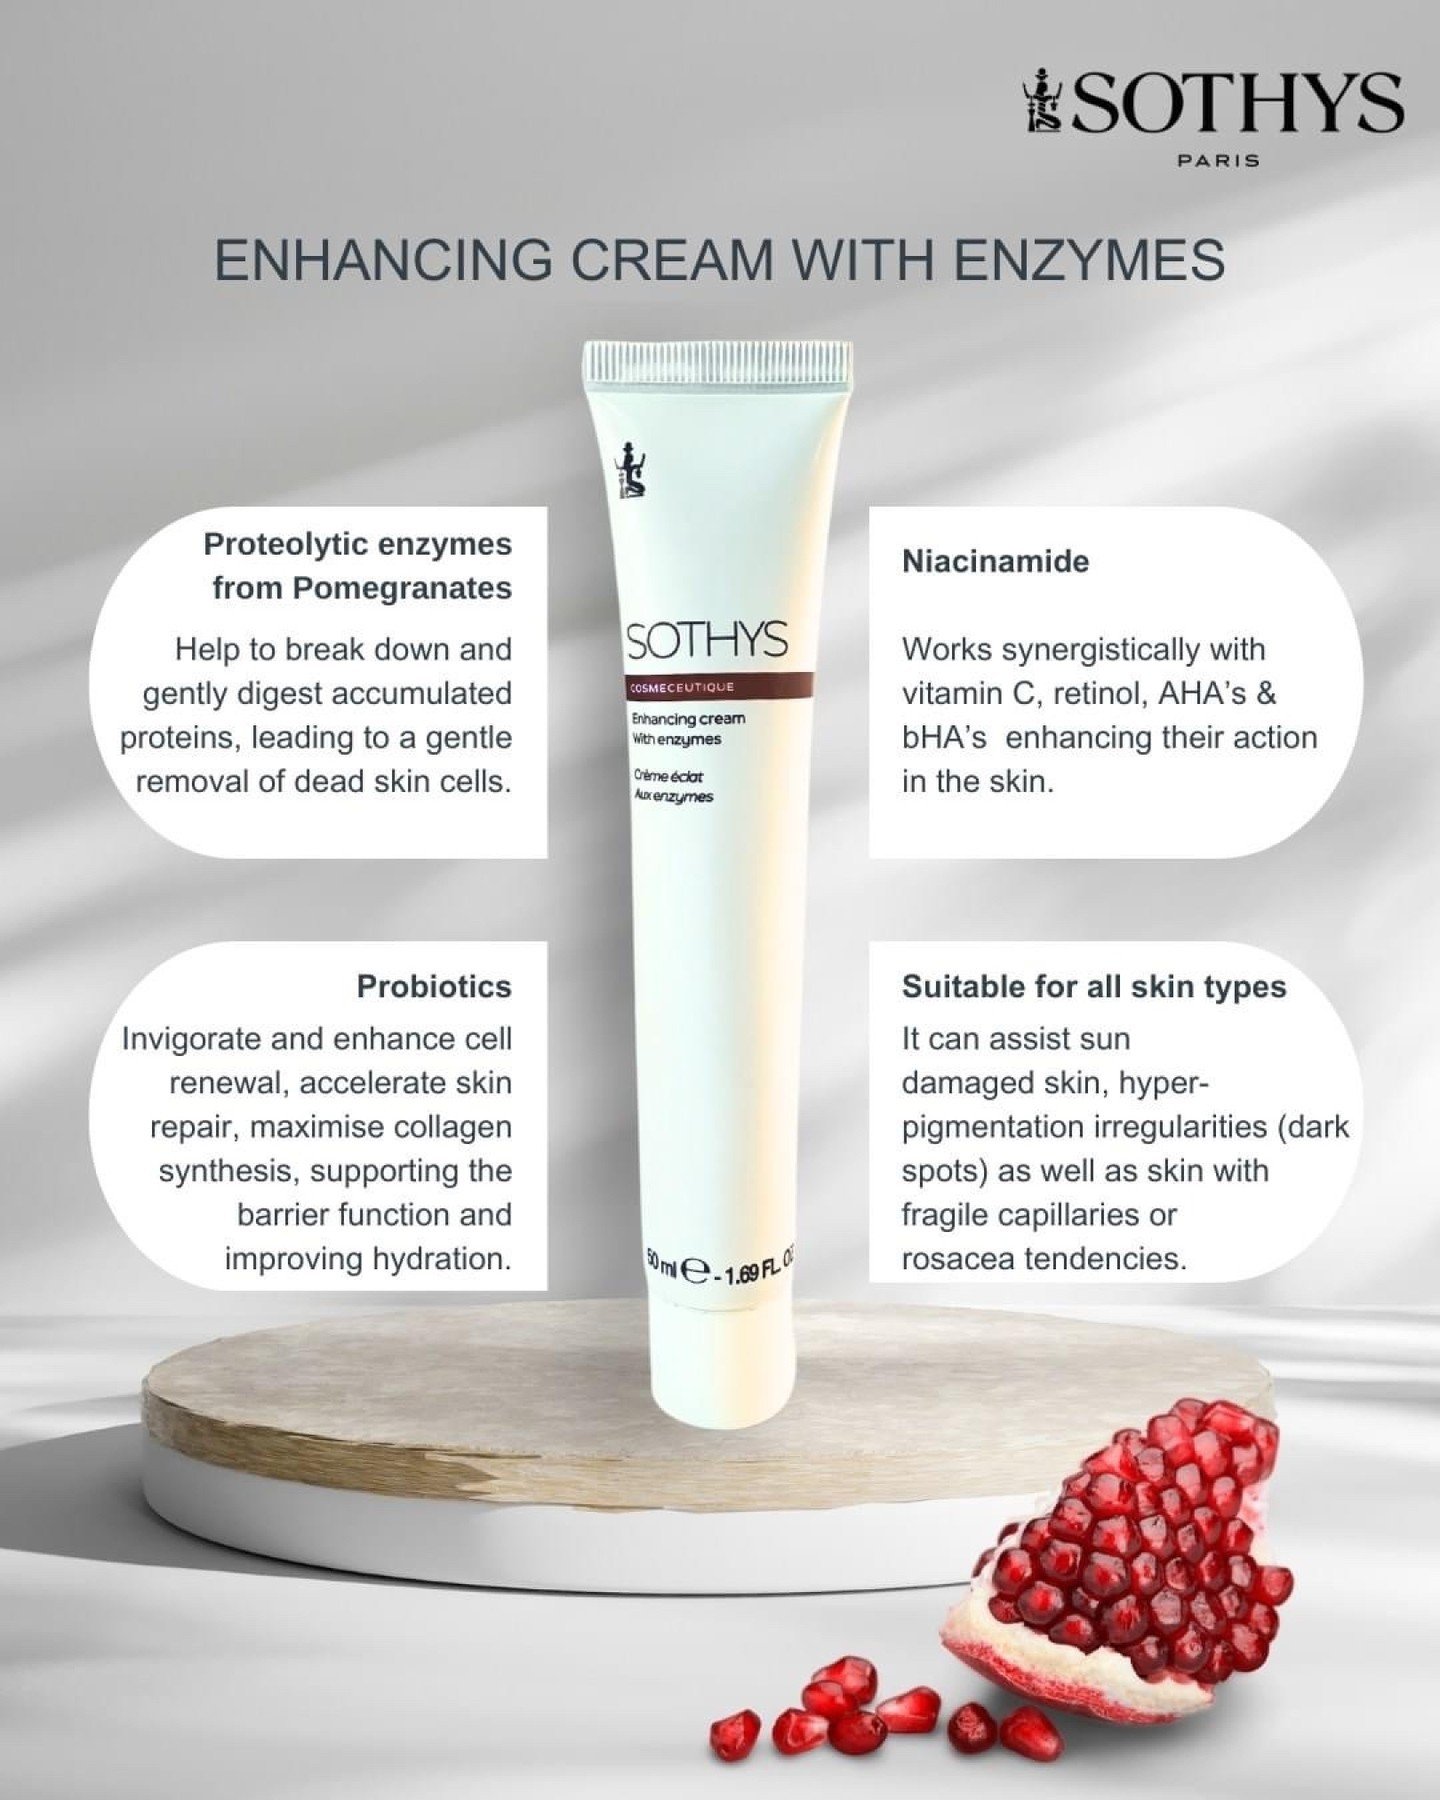 Are you searching for a skincare solution that caters to all your skin needs? Look no further than SOTHYS Enhancing Cream $99 - a powerful blend of enzymes, niacinamide, and probiotics that can help improve the appearance of your skin. 

This cream i